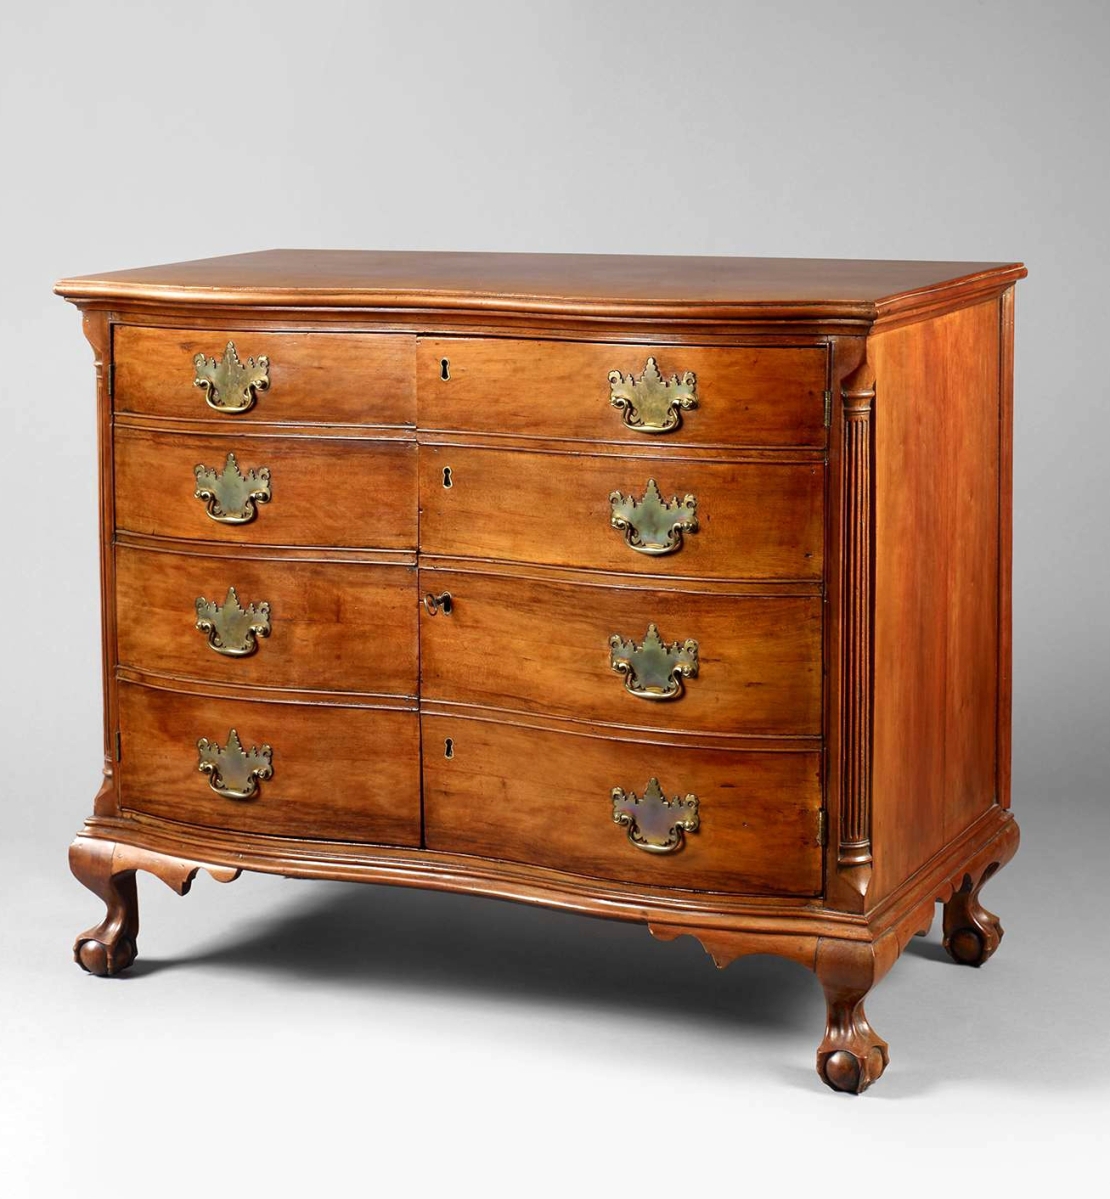 This rare, possibly made-to-order Chippendale oxbow faux-drawer cabinet has diagonal corner braces, a feature found in Litchfield, Conn. Cherry with pine and poplar secondary woods, height 35½ inches.